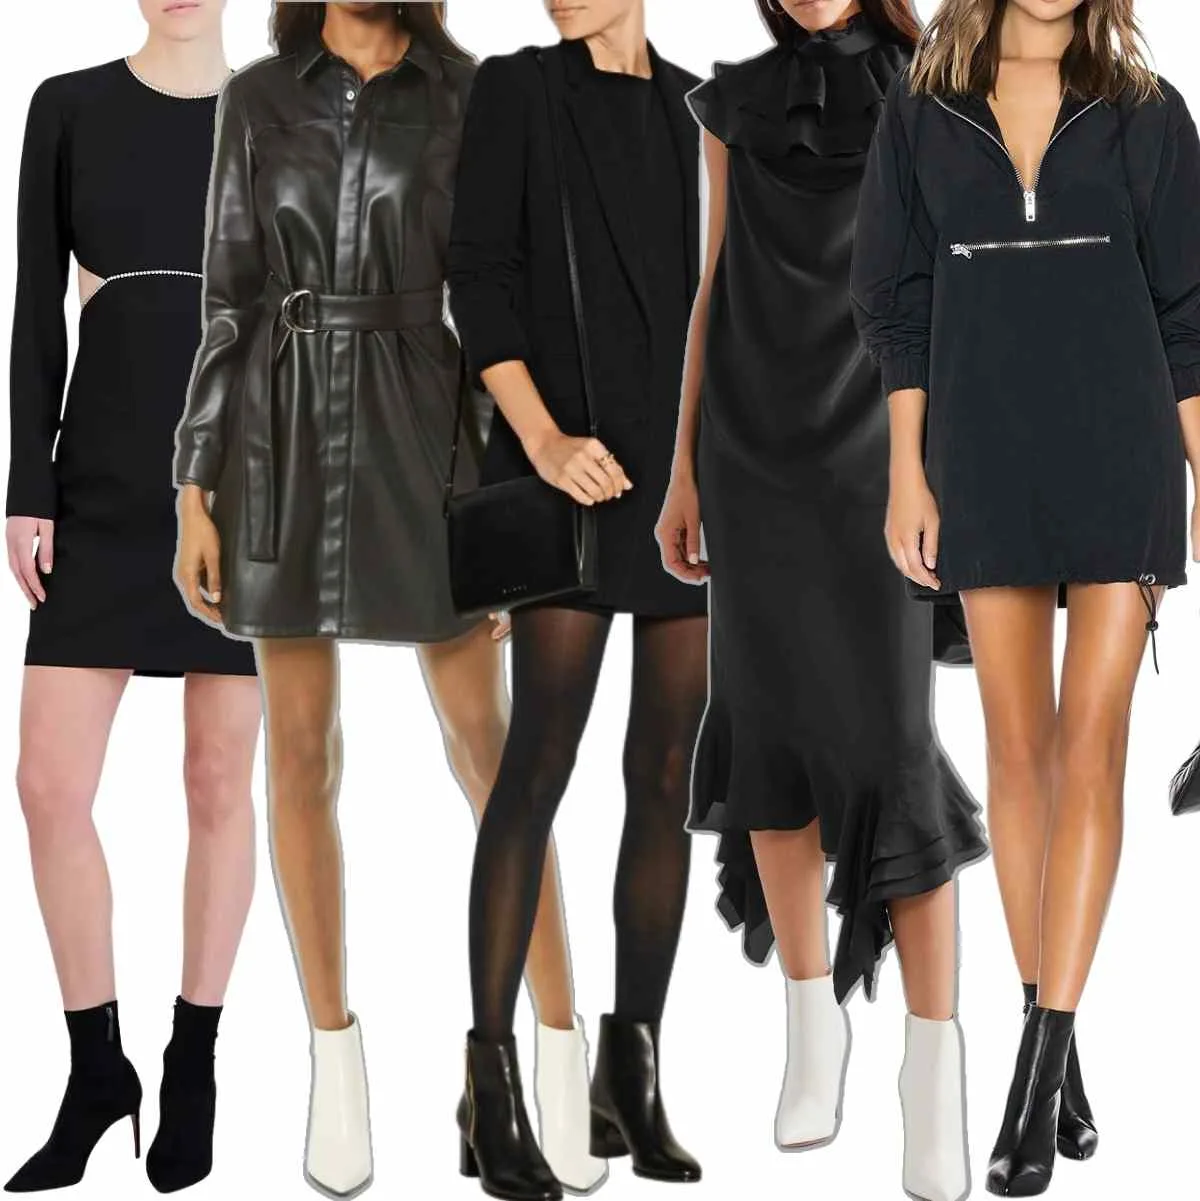 Collage of 5 women wearing different black dresses with ankle boots.